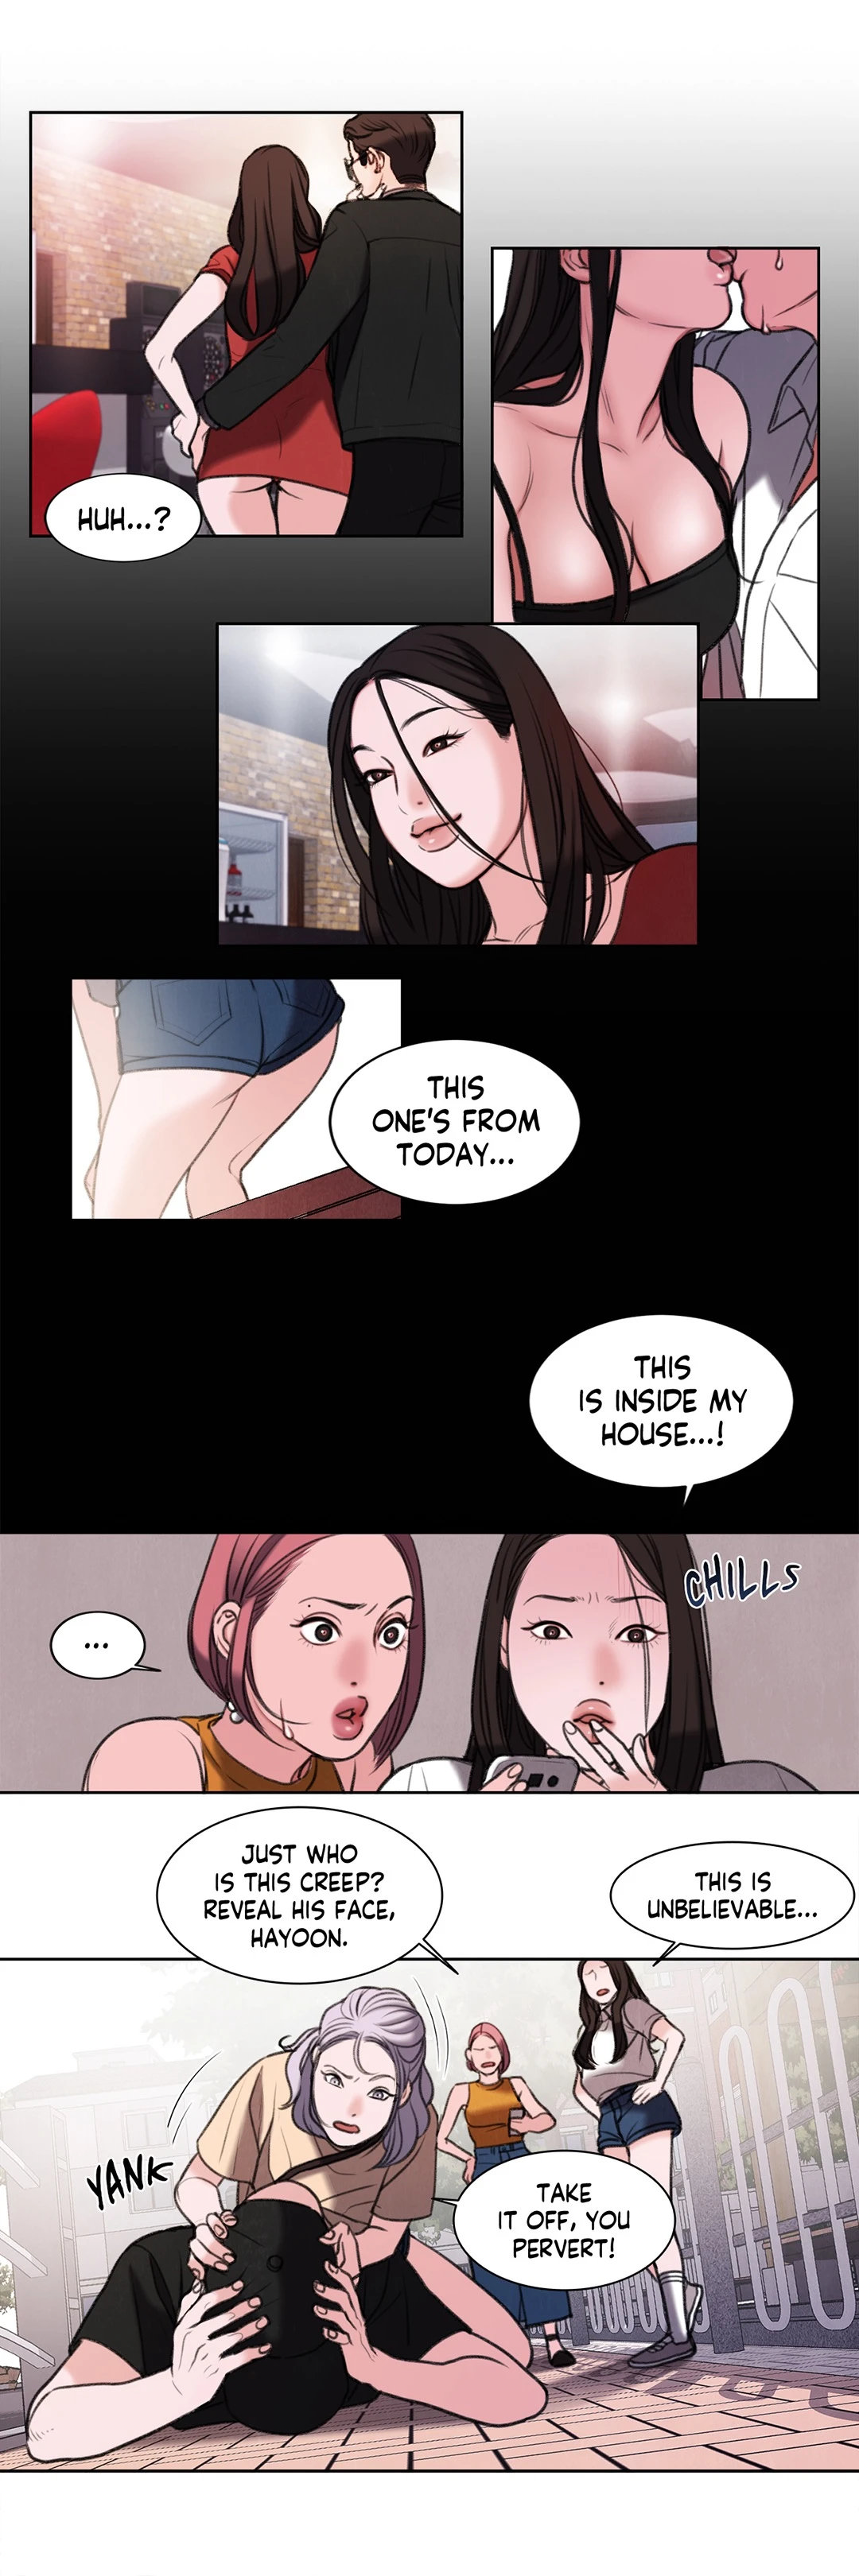 Dirty Reverie - Chapter 26 Page 7